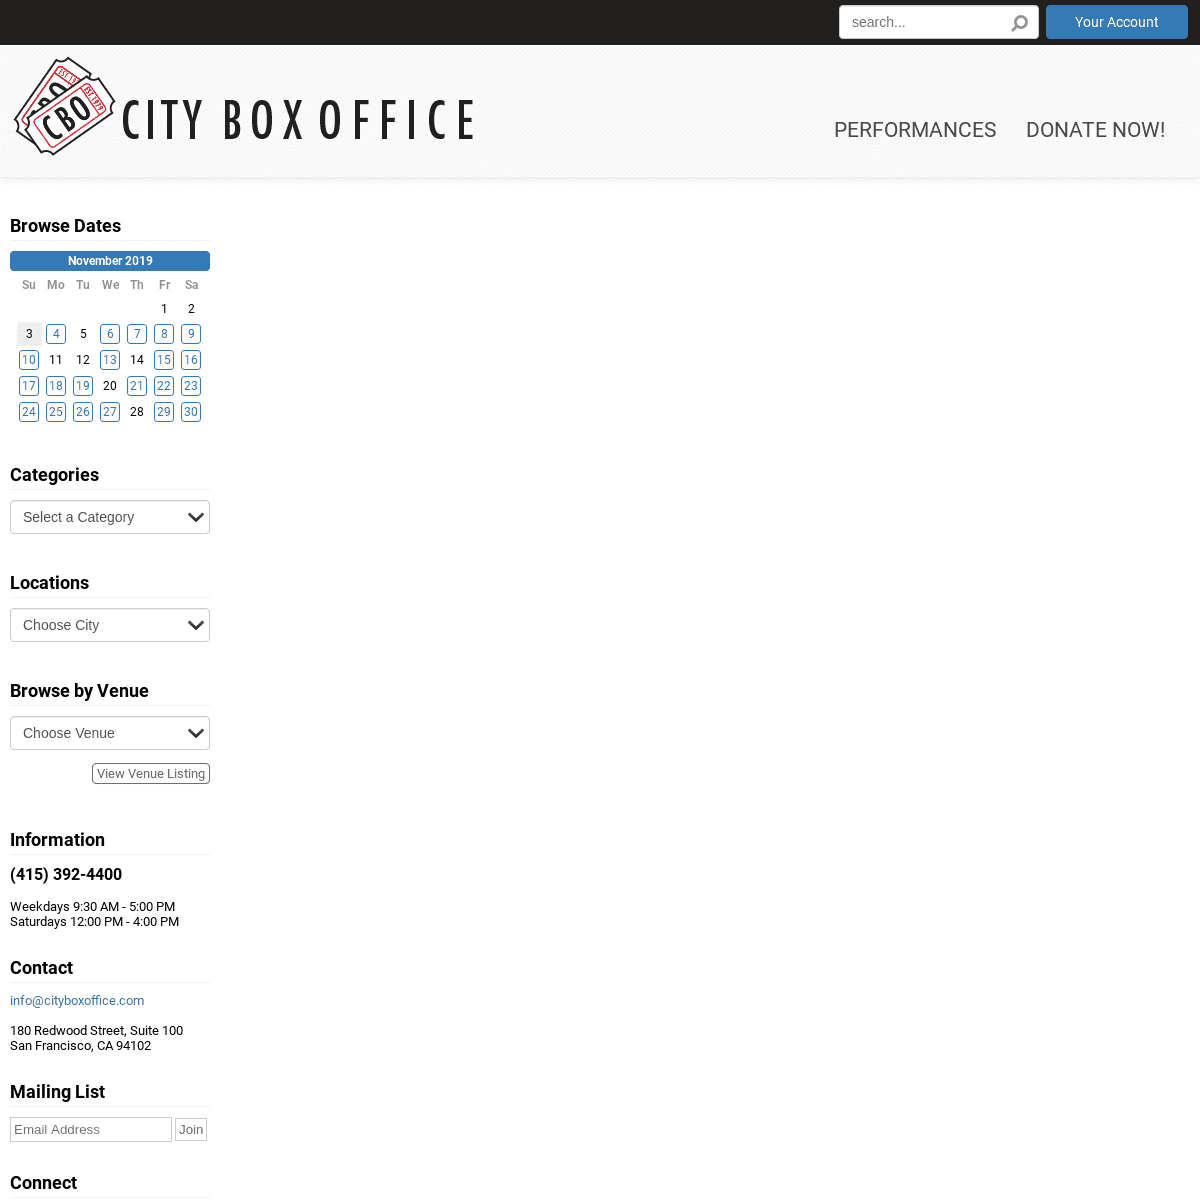 A complete backup of cityboxoffice.com